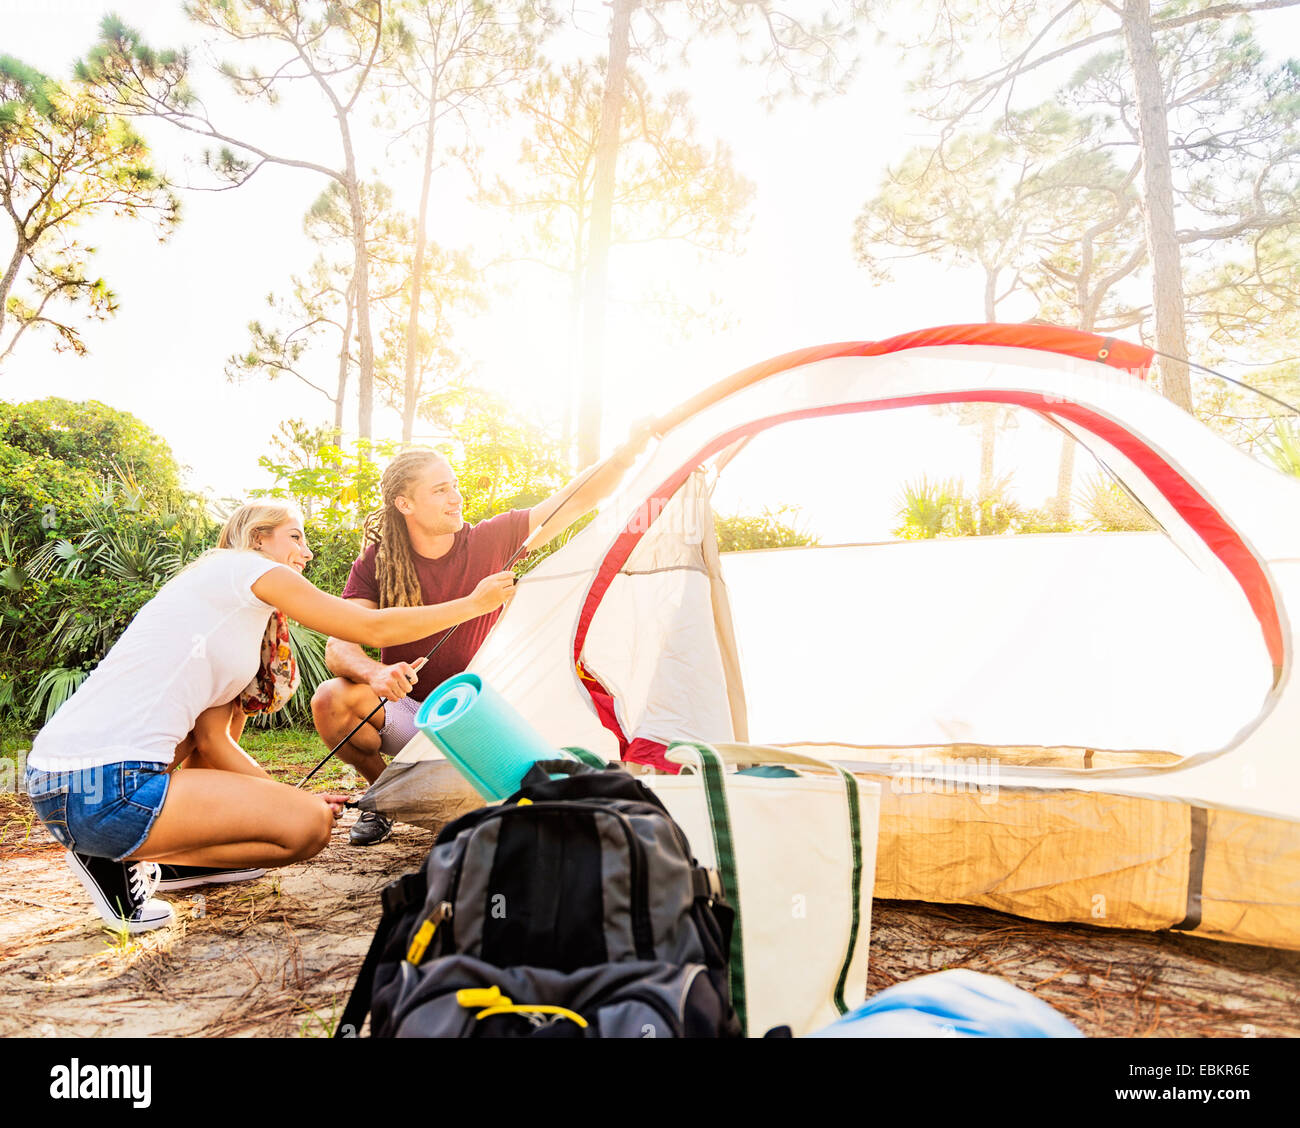 USA, Florida, Tequesta, Couple setting up tent in forest Stock Photo